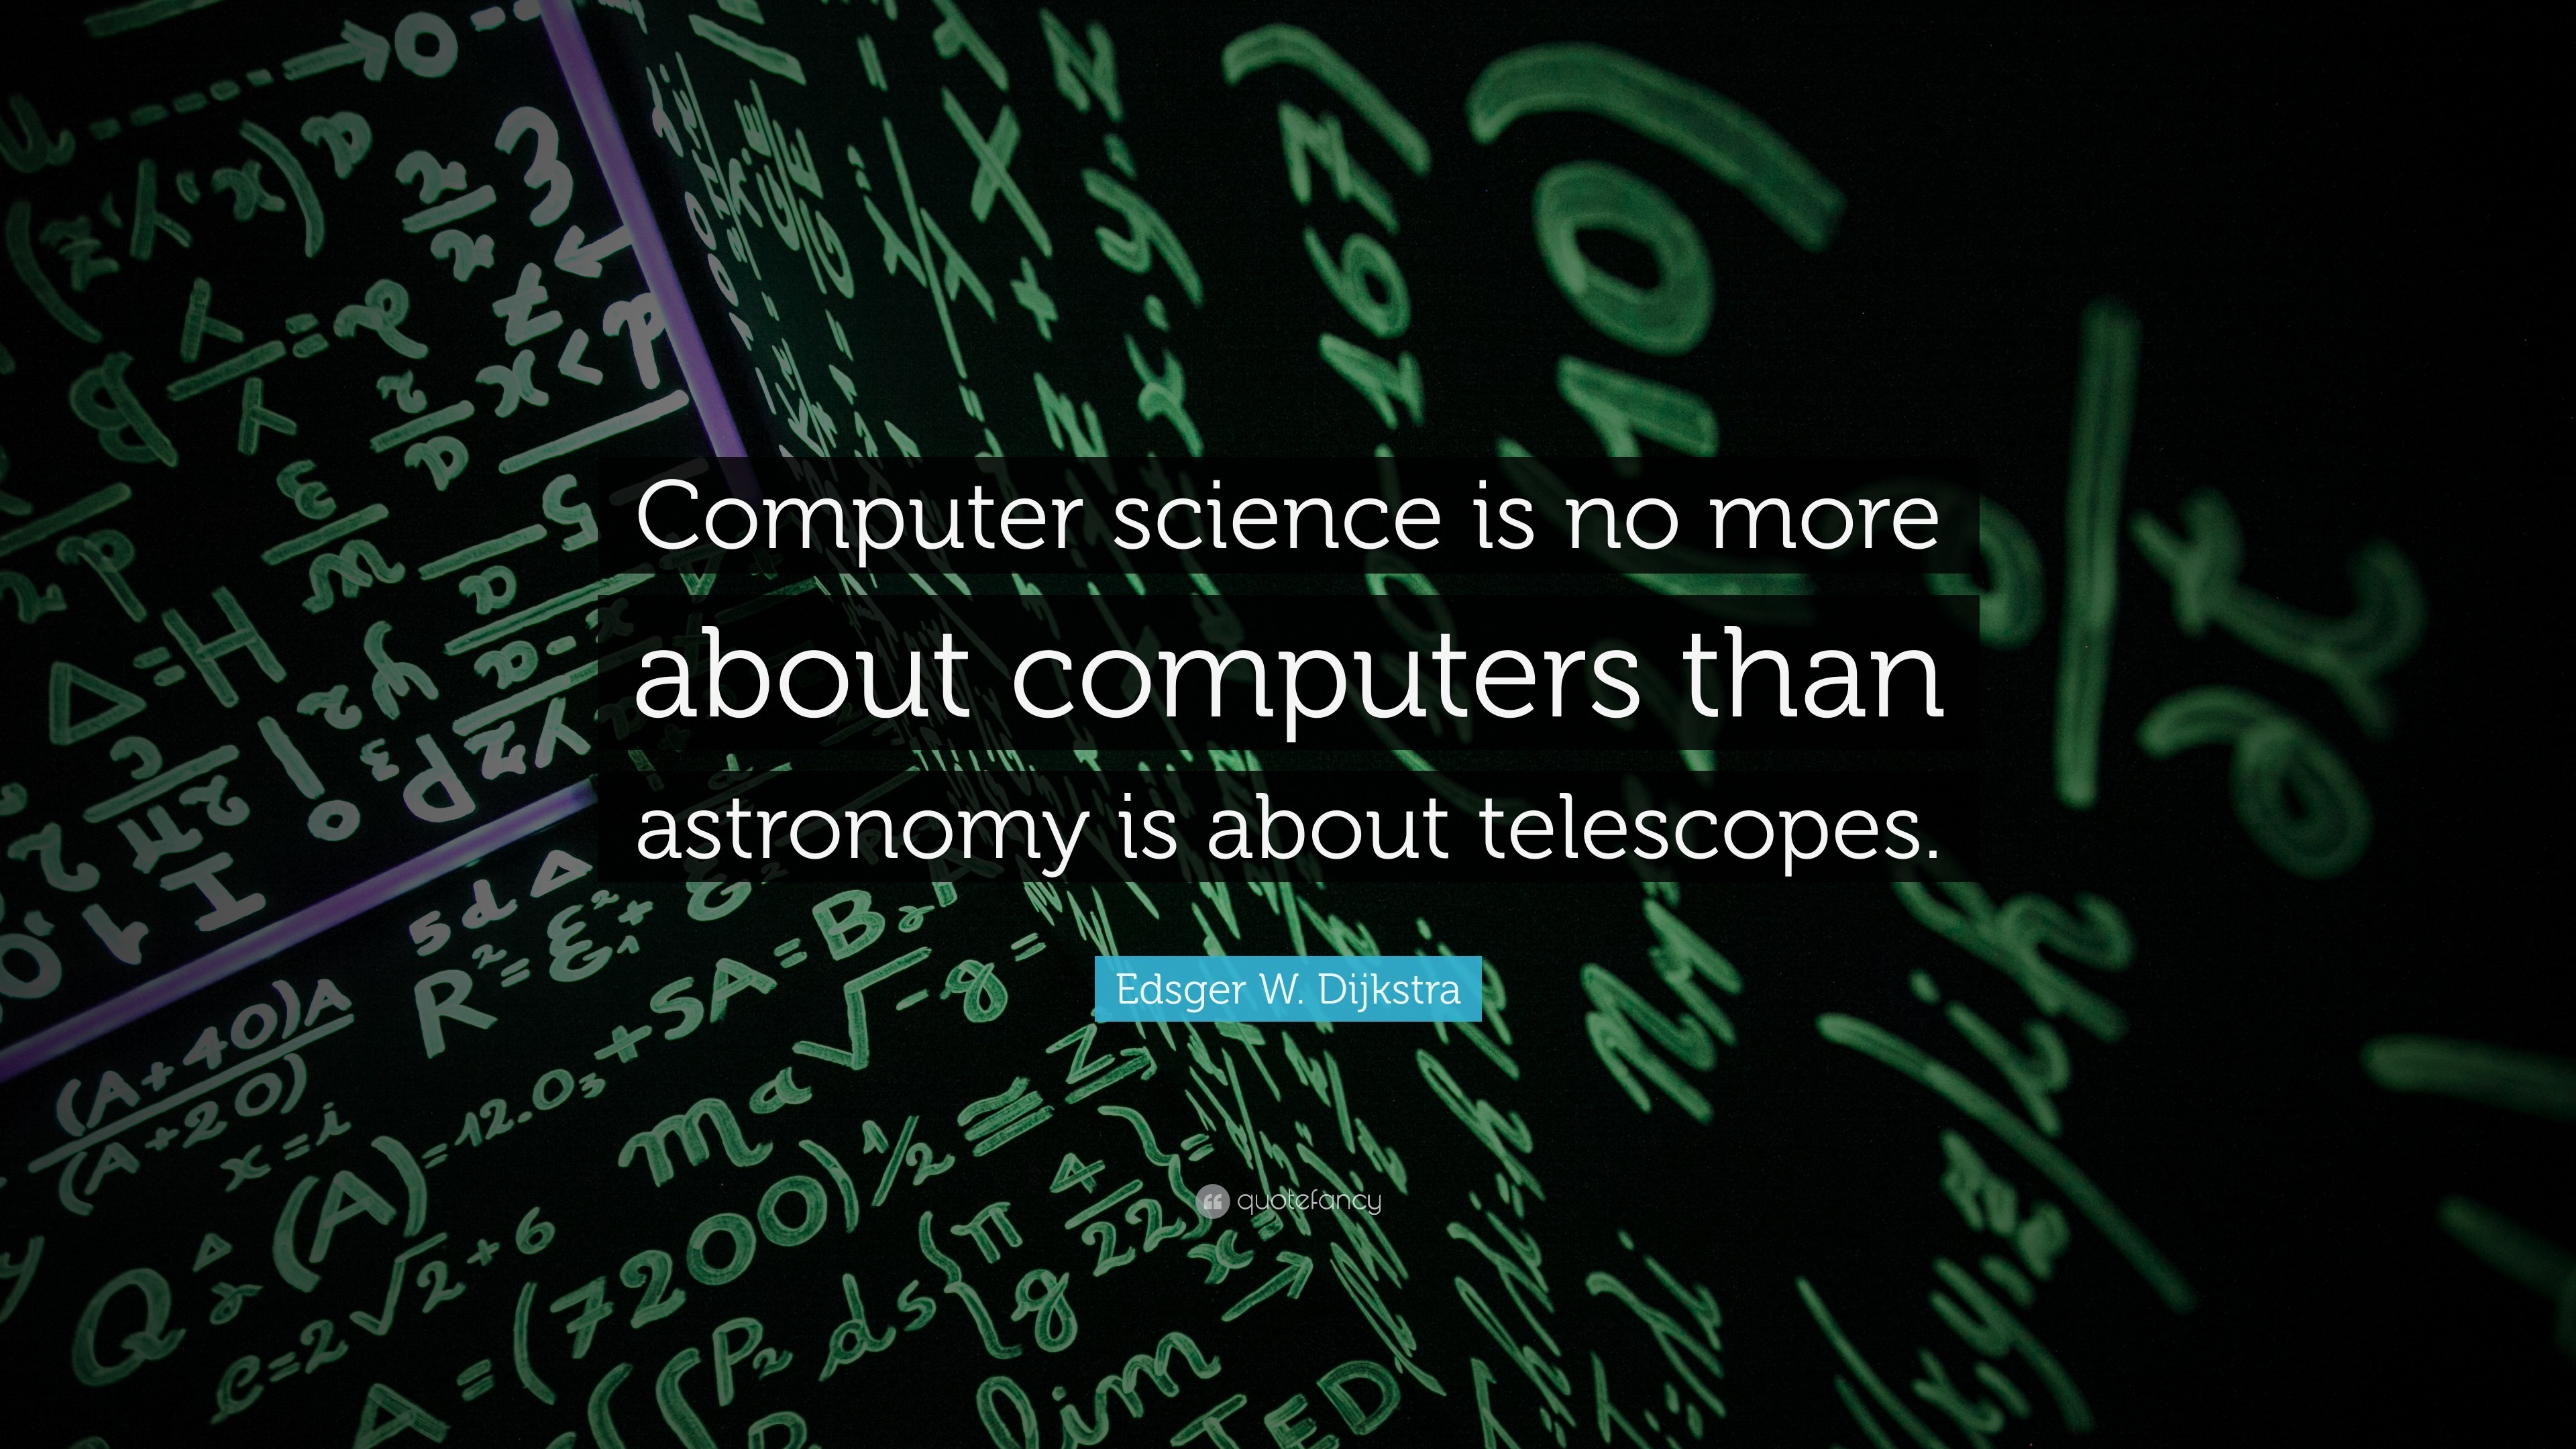 3840x2160 Edsger W. Dijkstra Quote: “Computer science is no more about computers than  astronomy